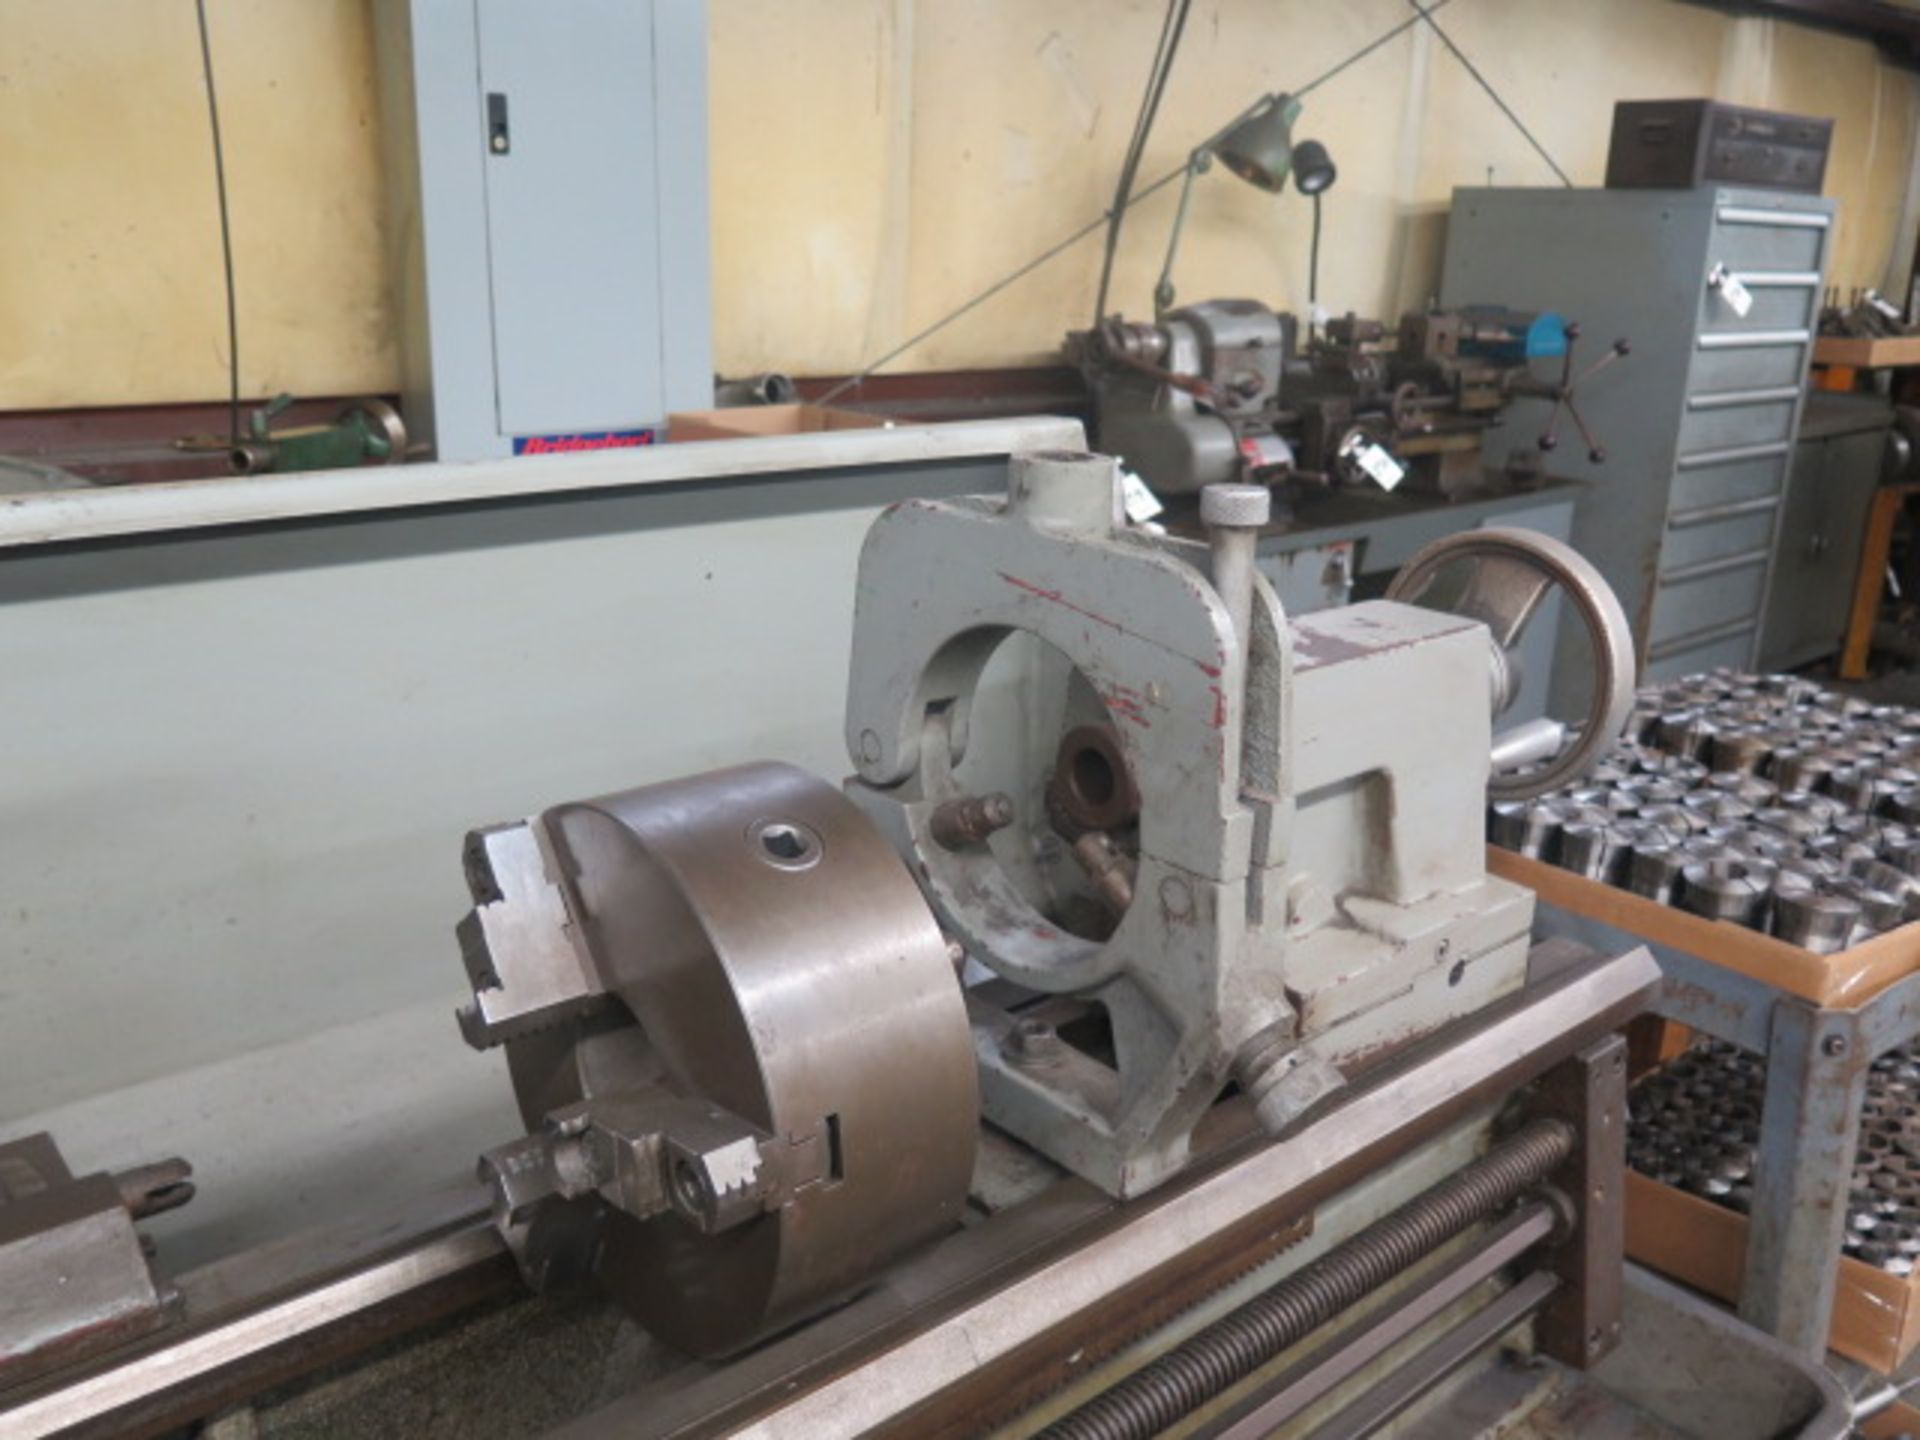 1996 American Turnmaster mdl. THL-1550 15” x 50” Geared Head Gap Bed Lathe s/n 15596060720 w/ 25- - Image 7 of 10